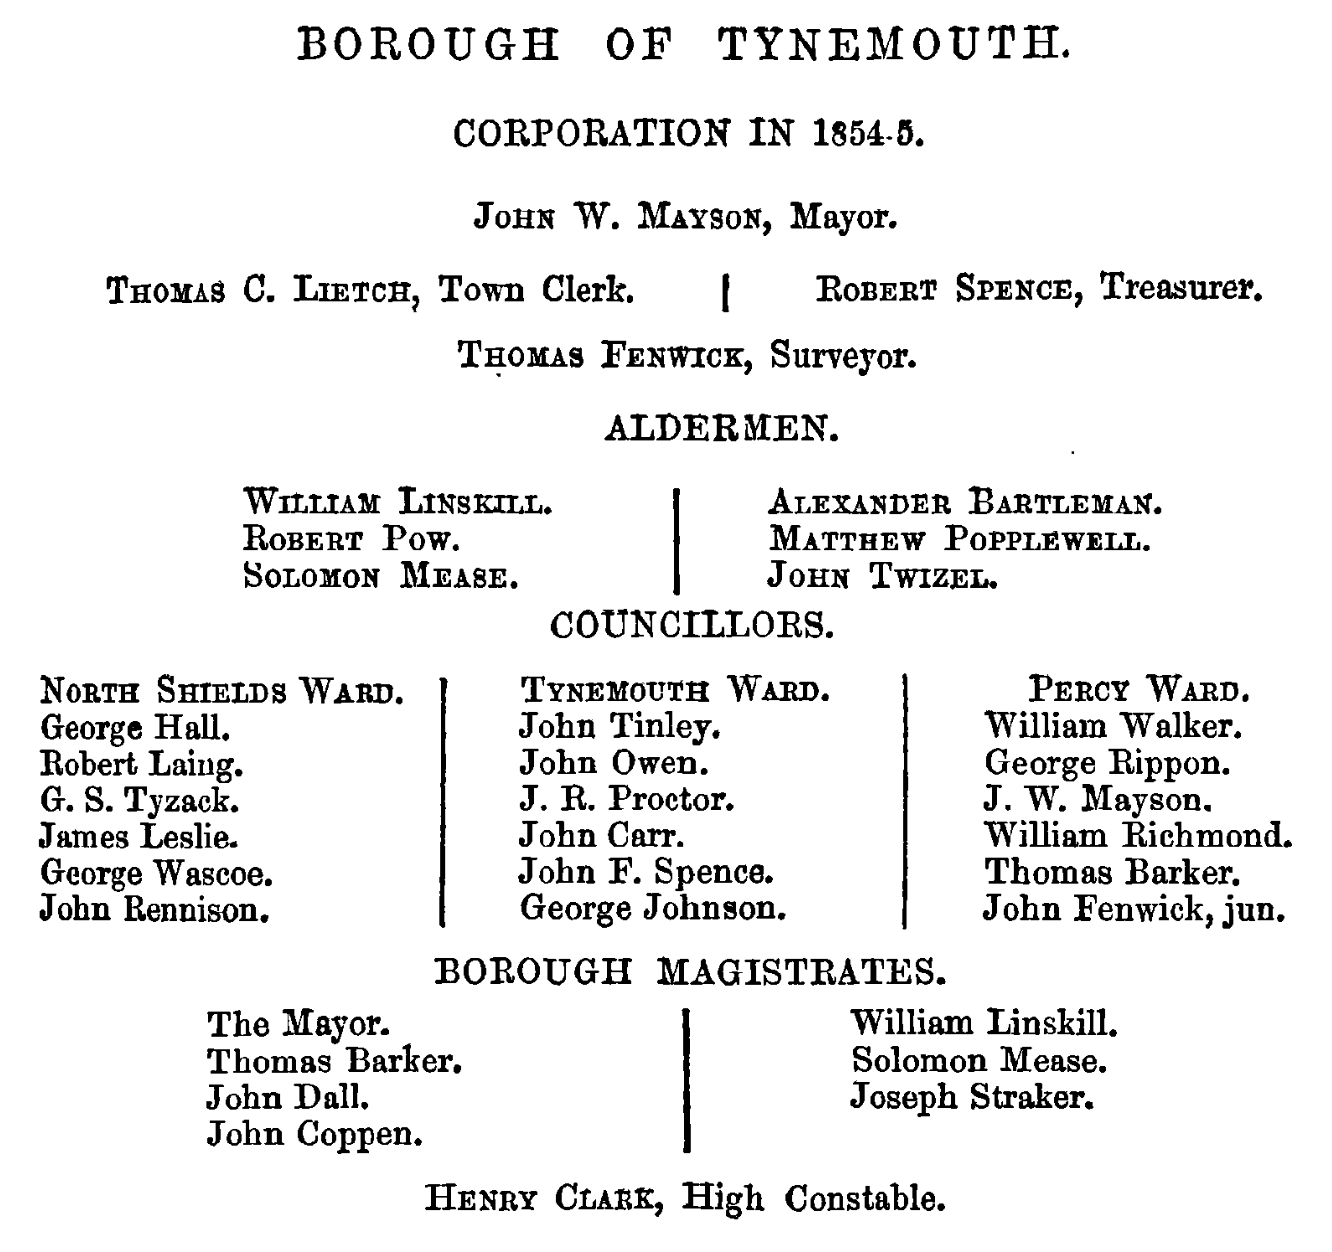 Bourough of Tynenouth Corporation - image showing structure 1854-5: Mayor, town clerk, treasurer, surveyor, aldermen(6), councillors(18), Magistrates(7) and High Constable